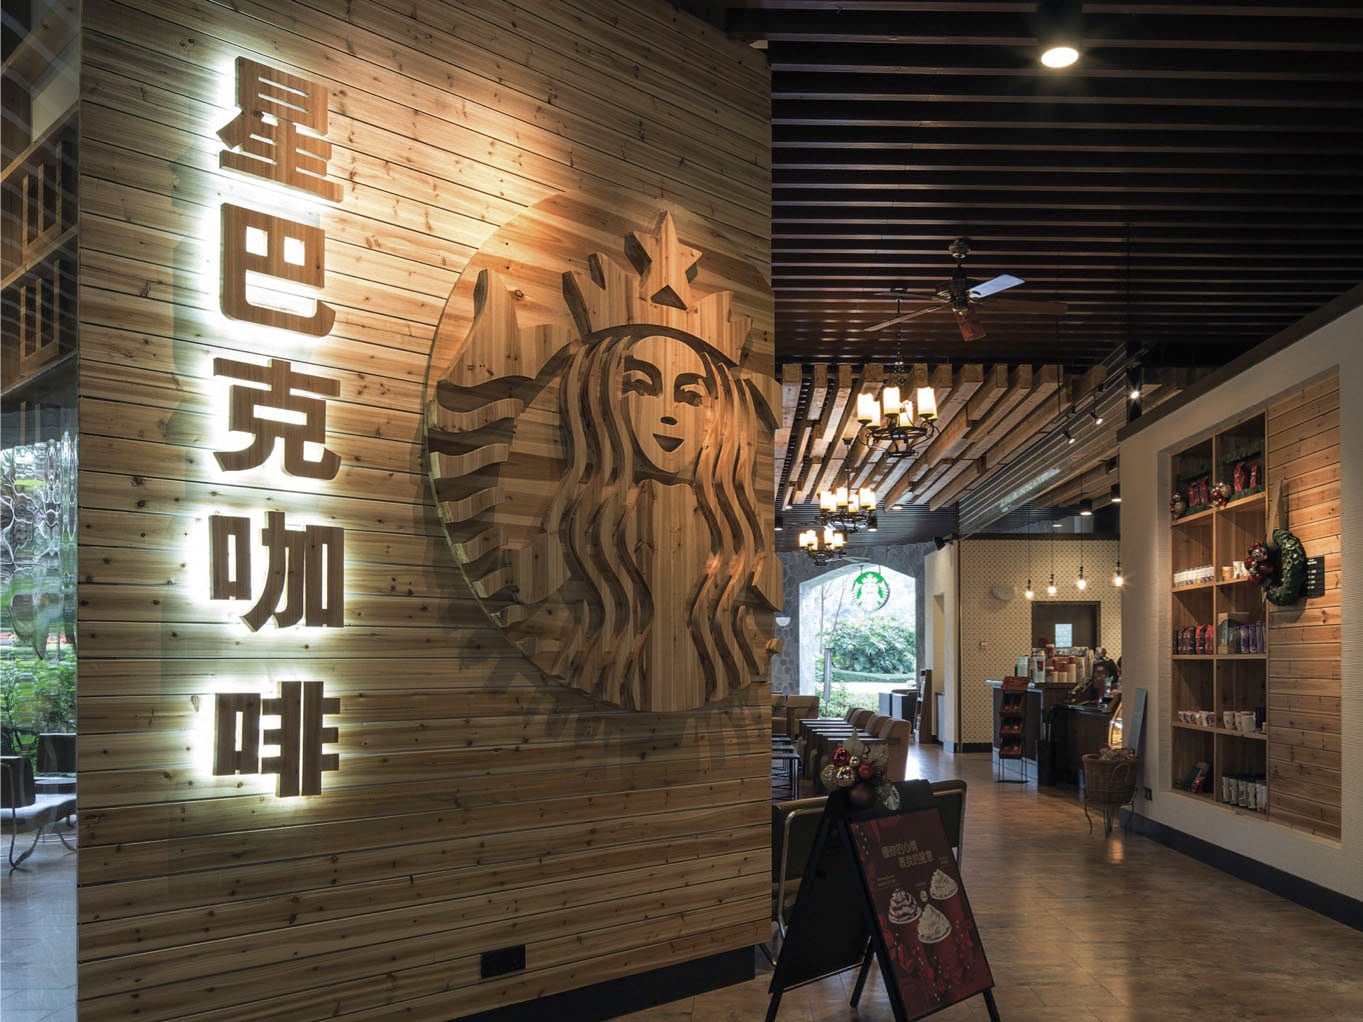 Entrance of Starbucks store in China